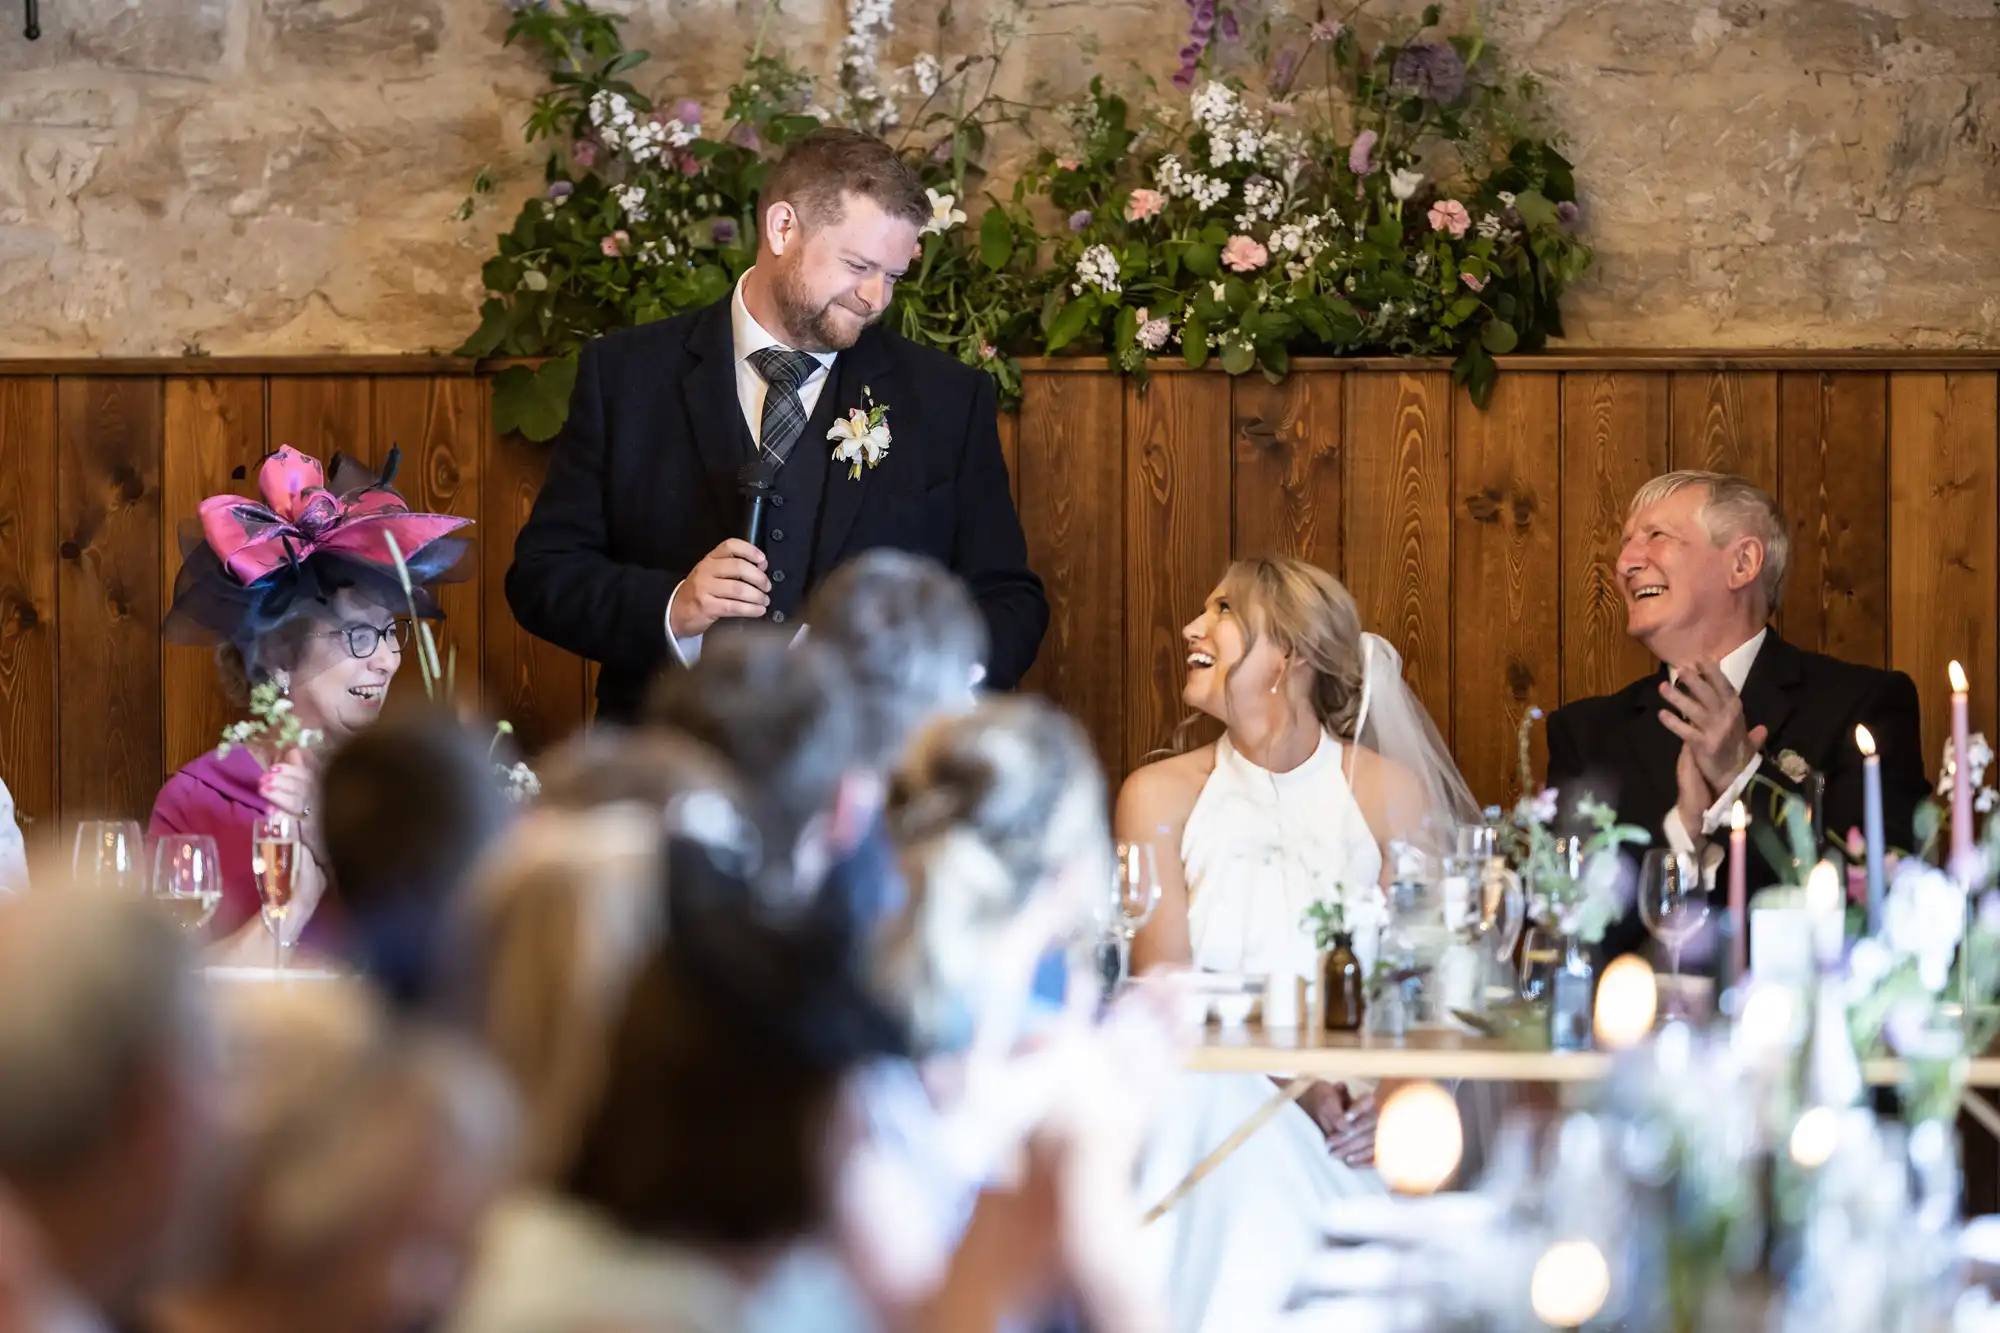 A groom giving a speech at a wedding reception, smiling at the bride, with guests laughing and enjoying the moment.